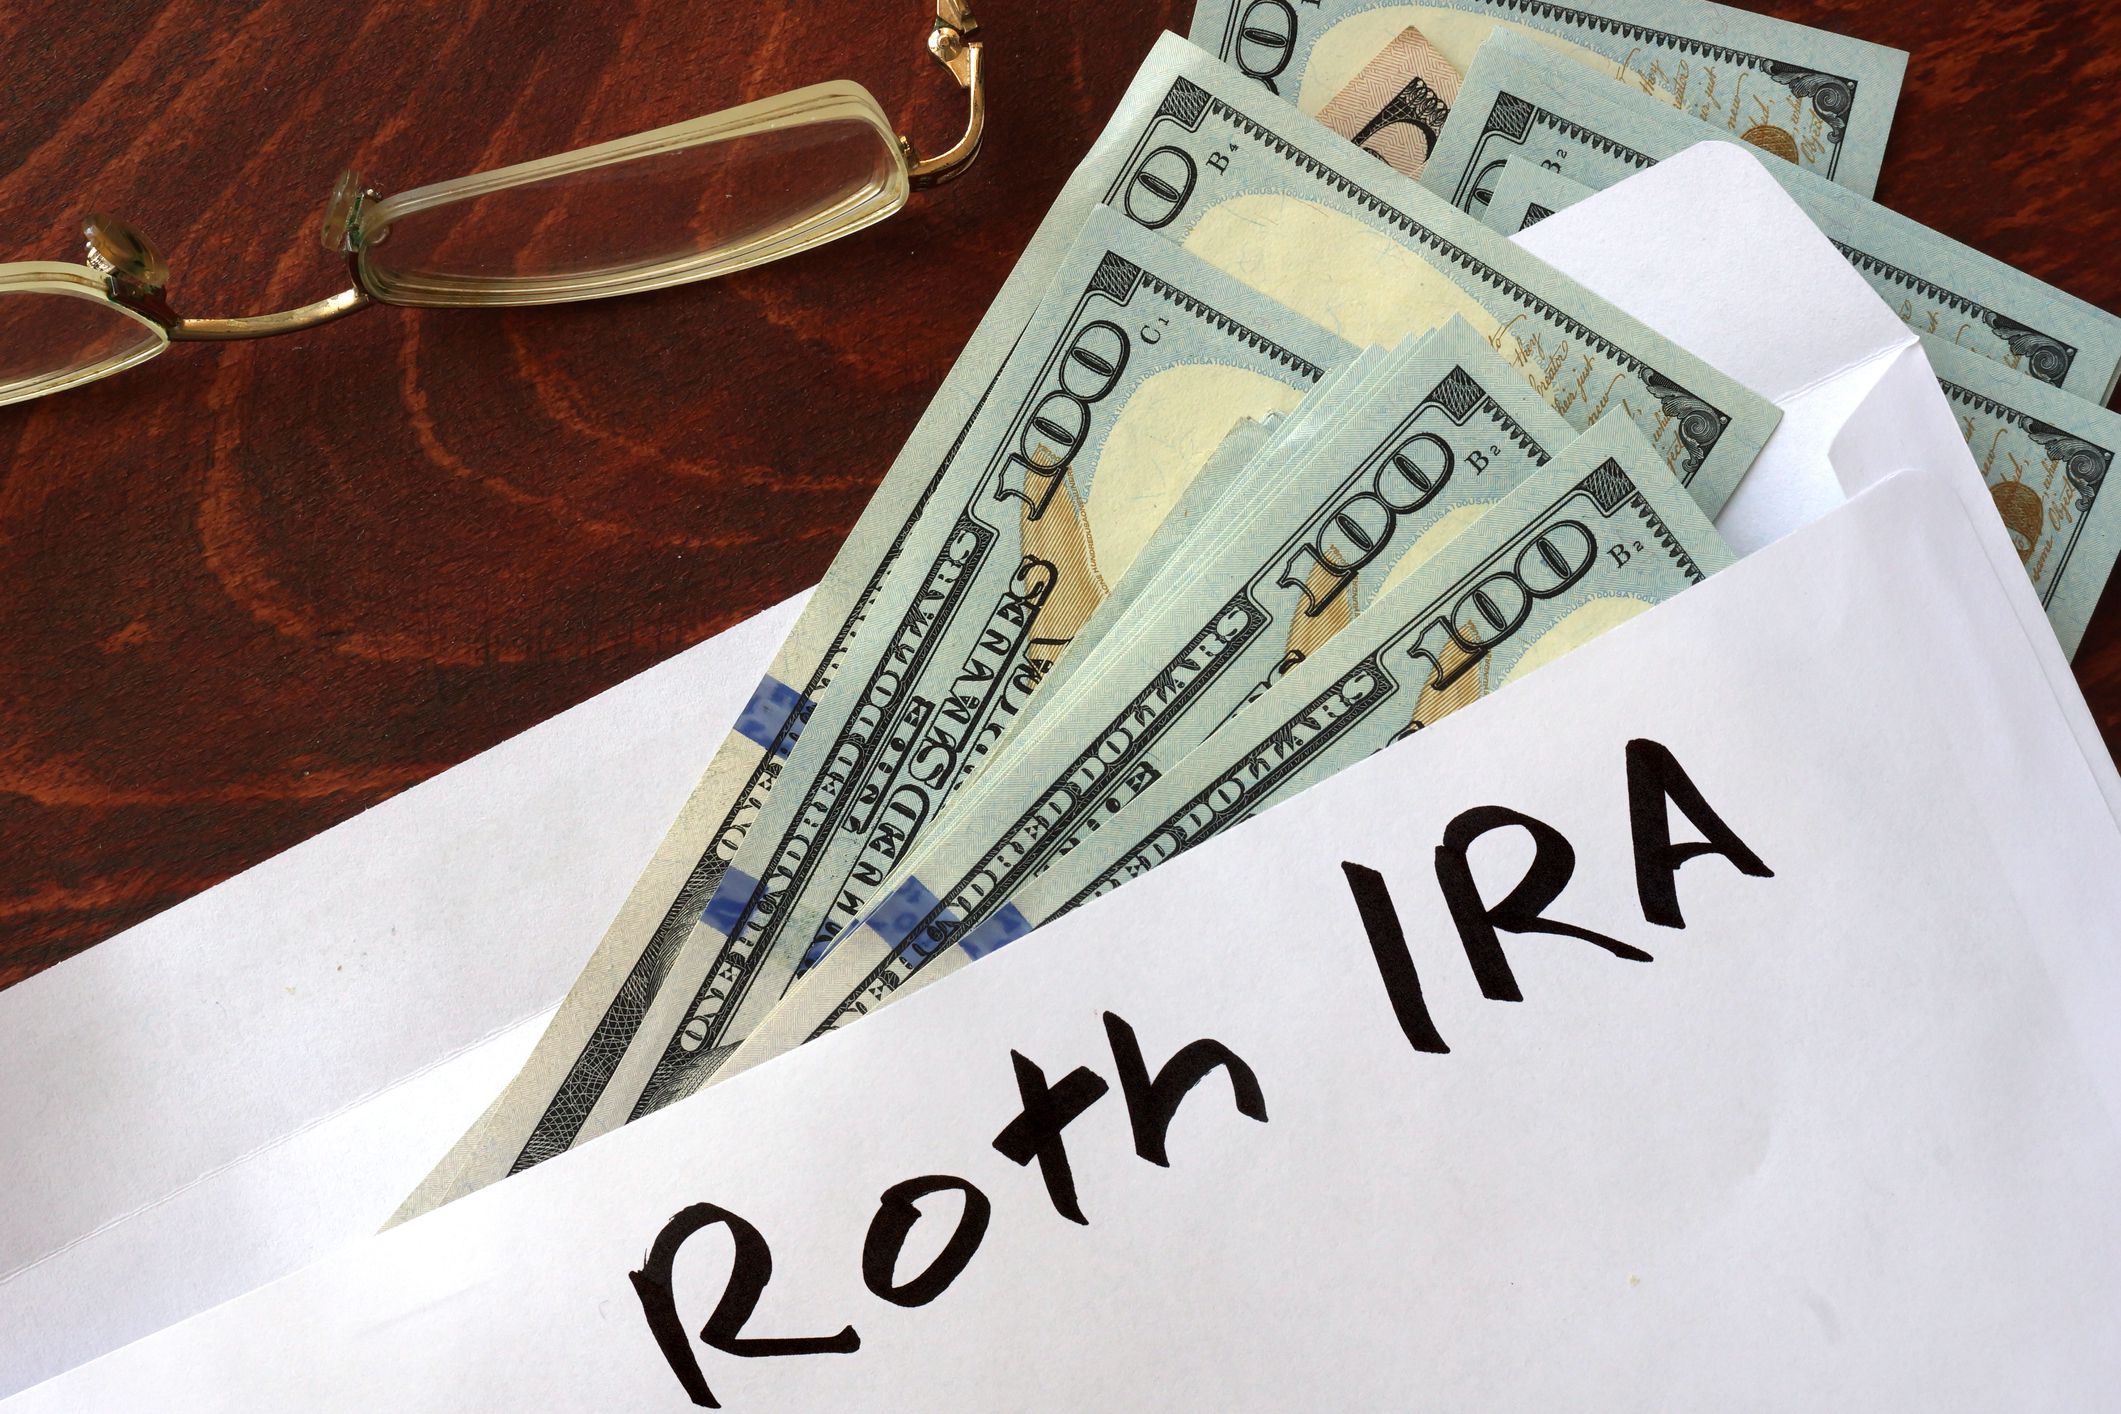 <p>This gets us back to Nate’s question about whether his young child qualifies for an IRA. </p><p>Many people don’t realize that kids can have an IRA if they have <i>earned income </i>from a part-time job or self-employment. As a parent, you can make an IRA contribution on your child’s behalf, for as much as they earn, up to the annual limit, which is $6,500 for 2023. But you can’t fund an IRA for an infant or toddler who can’t legitimately earn income.  </p><p>Nate, unfortunately, your child’s investment income doesn’t make her qualified to have an IRA. </p><p>However, if <i>you </i>qualify for a Roth IRA, you can fund it and take future withdrawals to pay her future expenses. There is an annual income limit to qualify for a Roth IRA, so if you’re a high earner, you may not be eligible to make contributions.</p><p>Unlike other retirement accounts, you can withdraw your original contributions (but not earnings) from a Roth IRA before retirement without having to pay taxes or a 10% early withdrawal penalty. That flexibility makes a Roth IRA a great account to invest for retirement and a child’s future expenses.</p><p class="p1"><i>This article originally appeared on <a href="https://www.quickanddirtytips.com/articles/5-ways-to-help-your-kids-become-rich/">Money Girl</a></i><i> and was syndicated by</i><a href="https://mediafeed.org/"><i> MediaFeed.org</i></a><i>.</i></p>